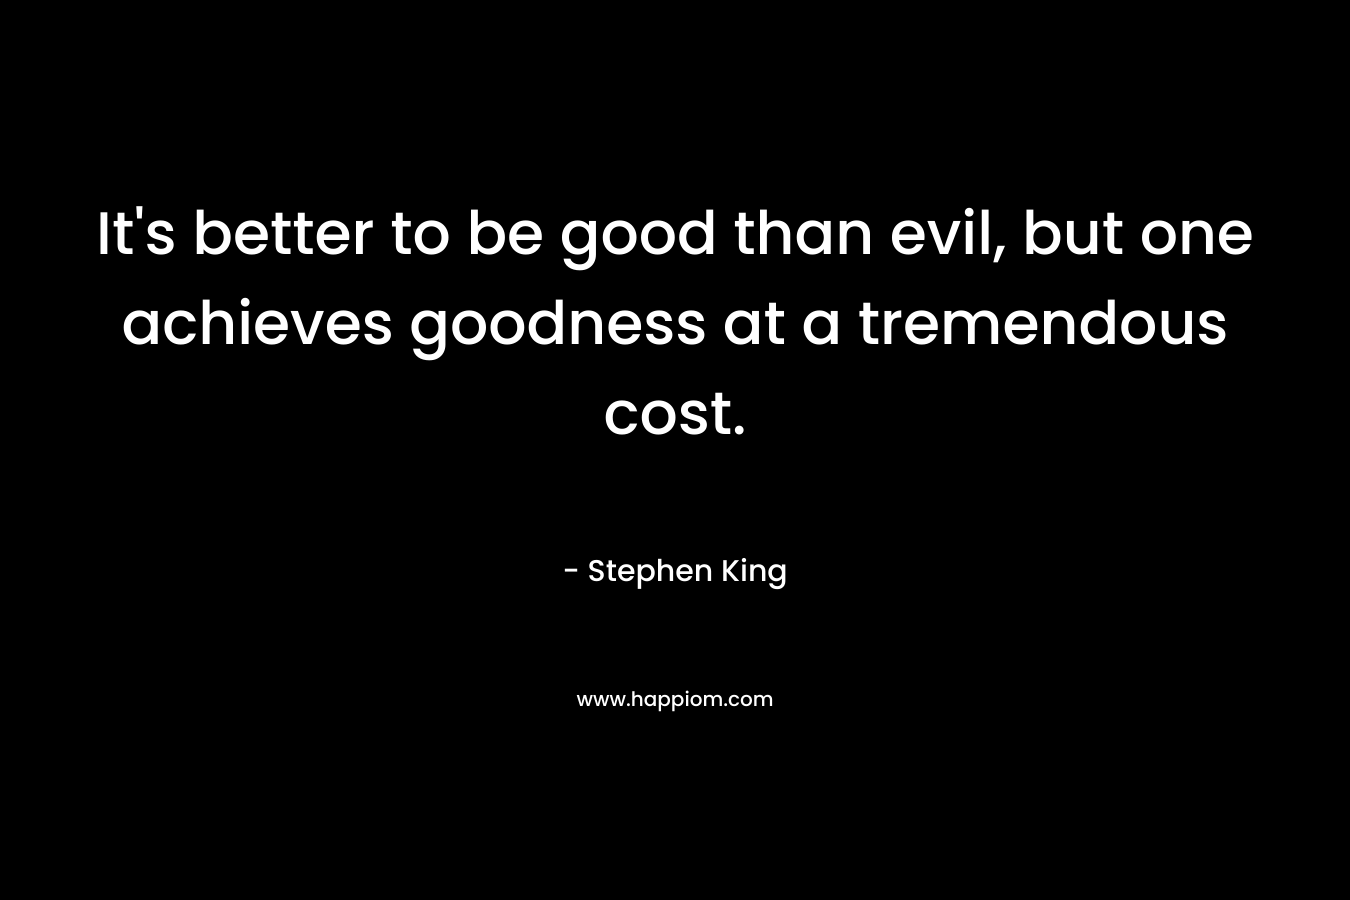 It’s better to be good than evil, but one achieves goodness at a tremendous cost. – Stephen King